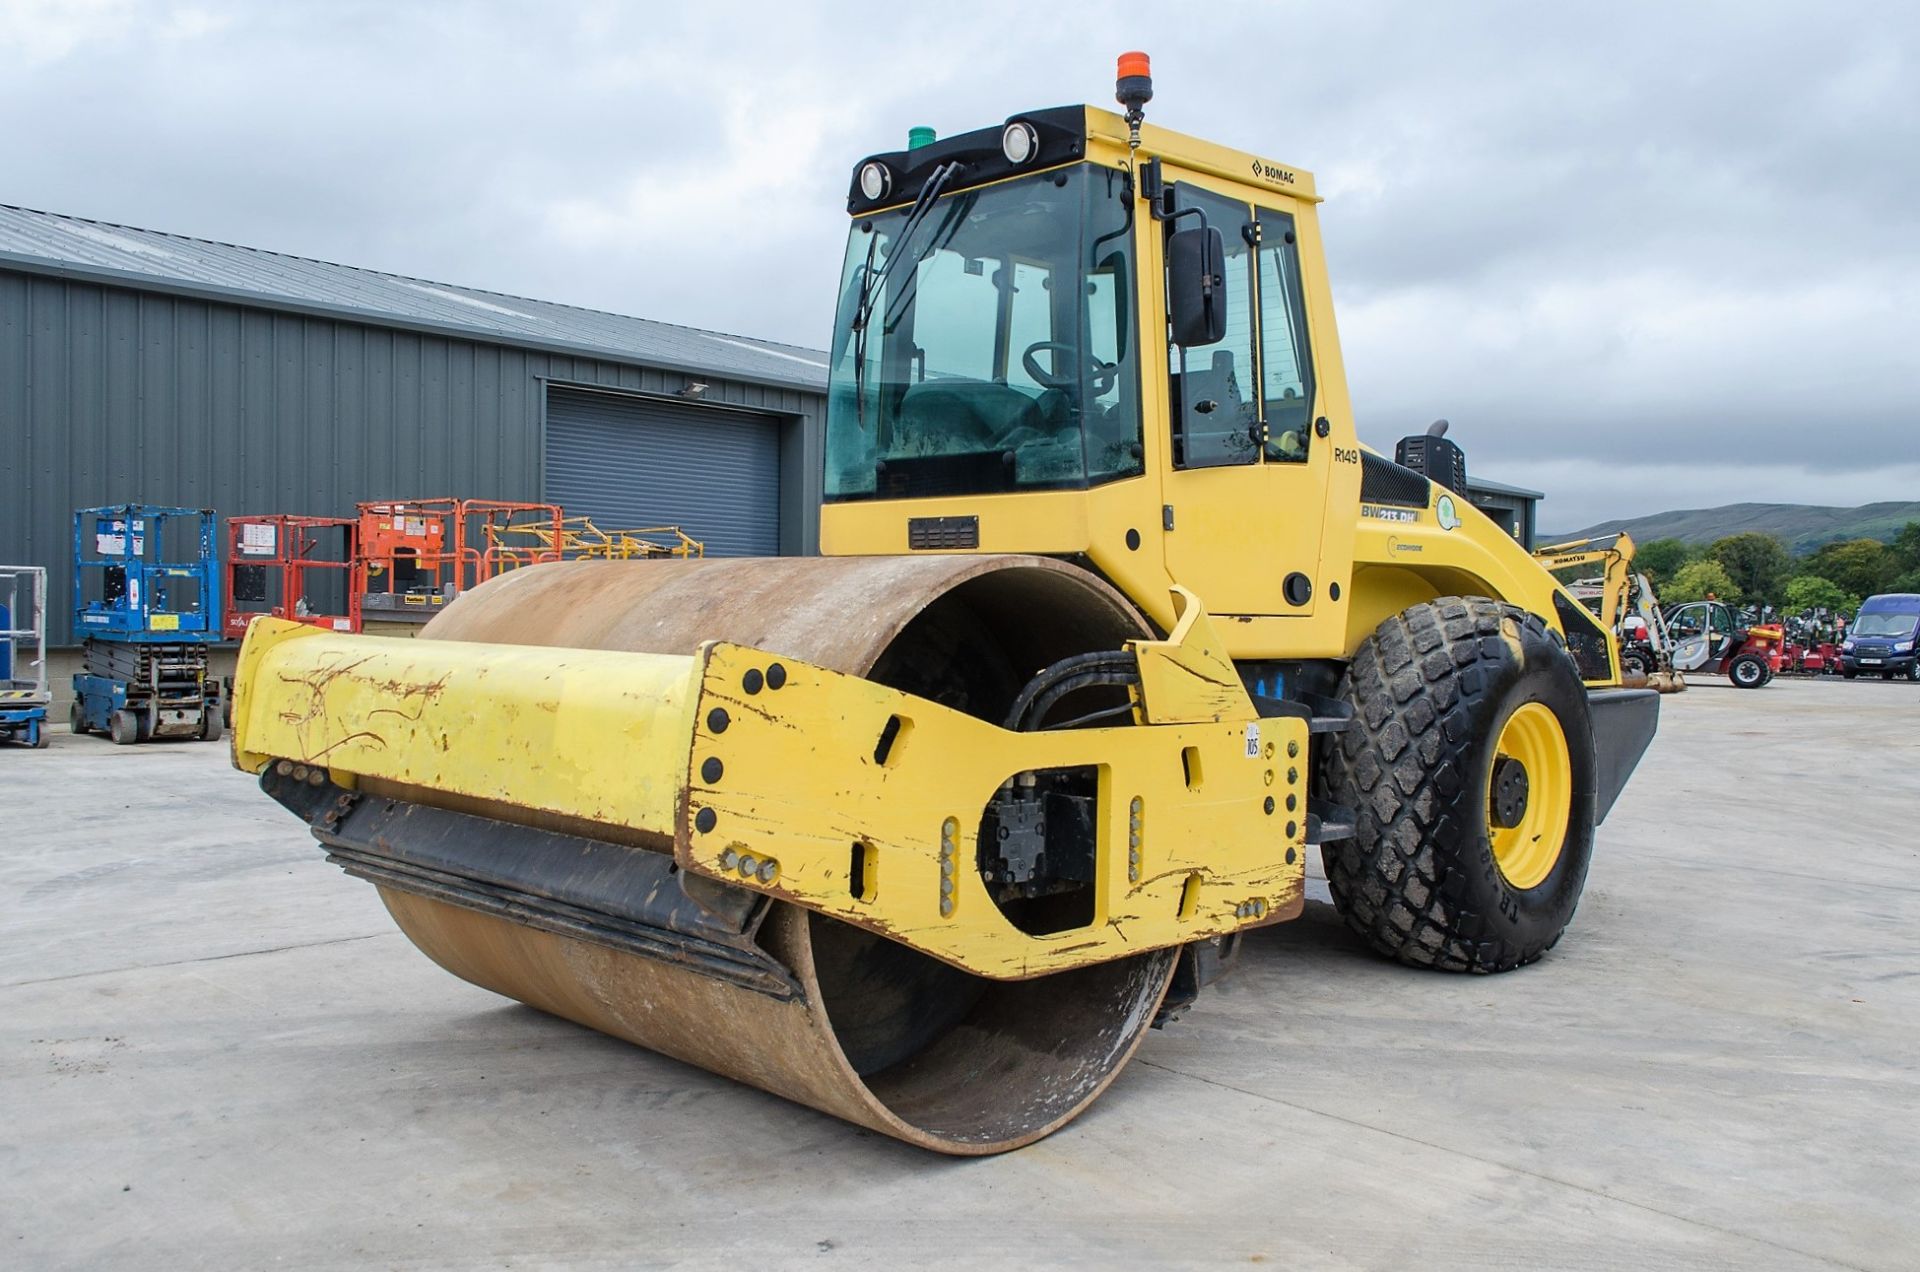 Bomag BW213 DH-4i single drum roller Year: 2014 S/N: 101004 Recorded Hours: 2194 ** This lot is